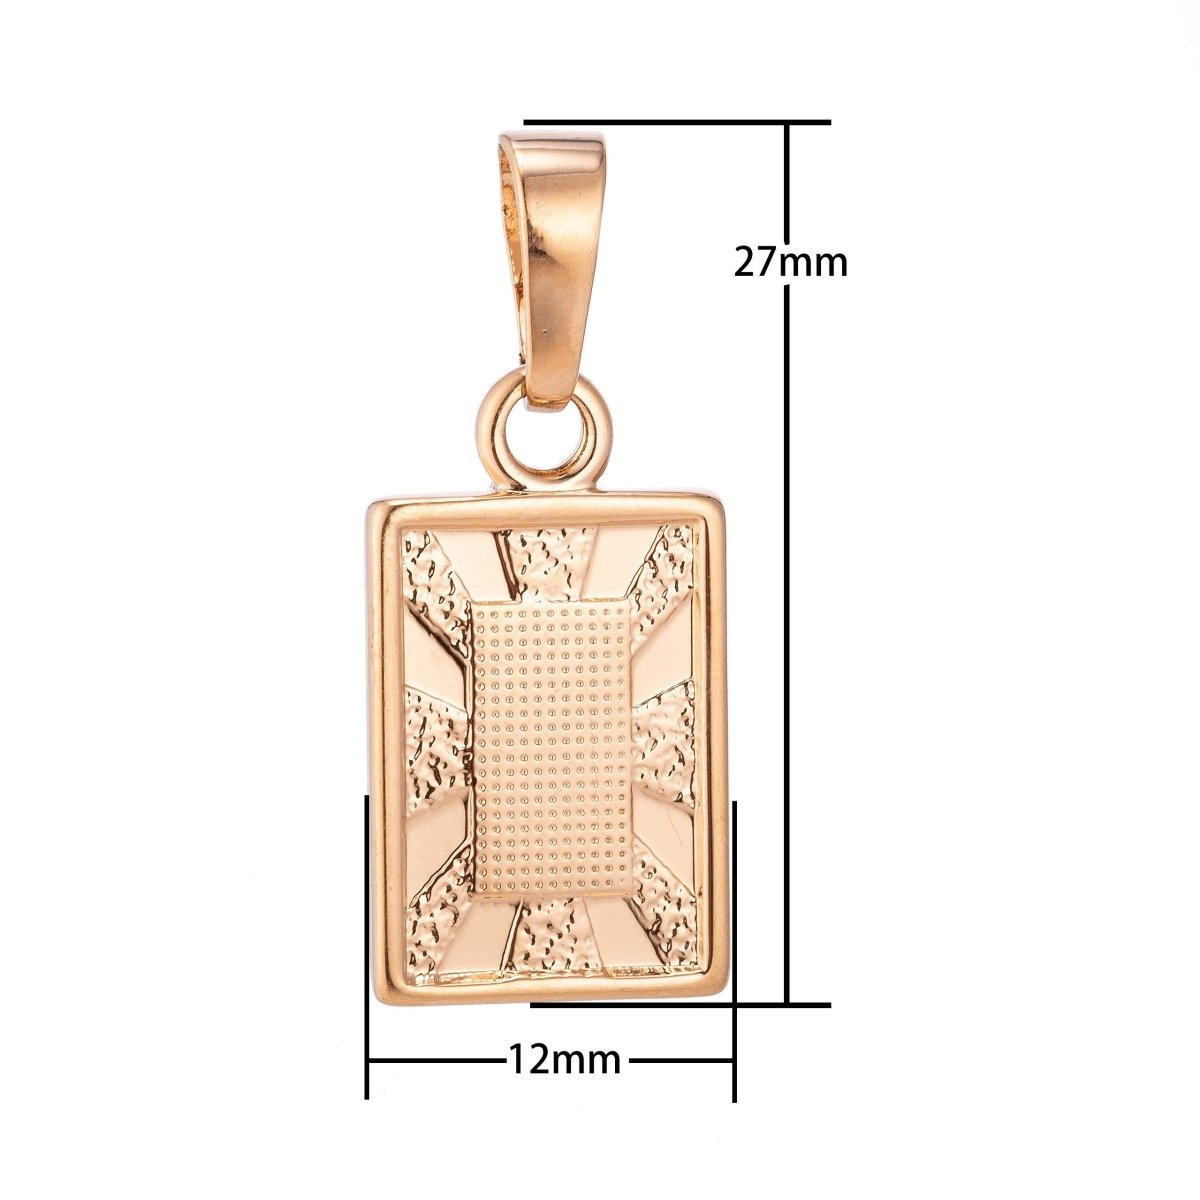 18K Gold filled Golden Frame Geometric Sunburst Bar Textured Dangle Necklace Pendant Charm w/ Bails Findings for Jewelry Making H-624 - DLUXCA